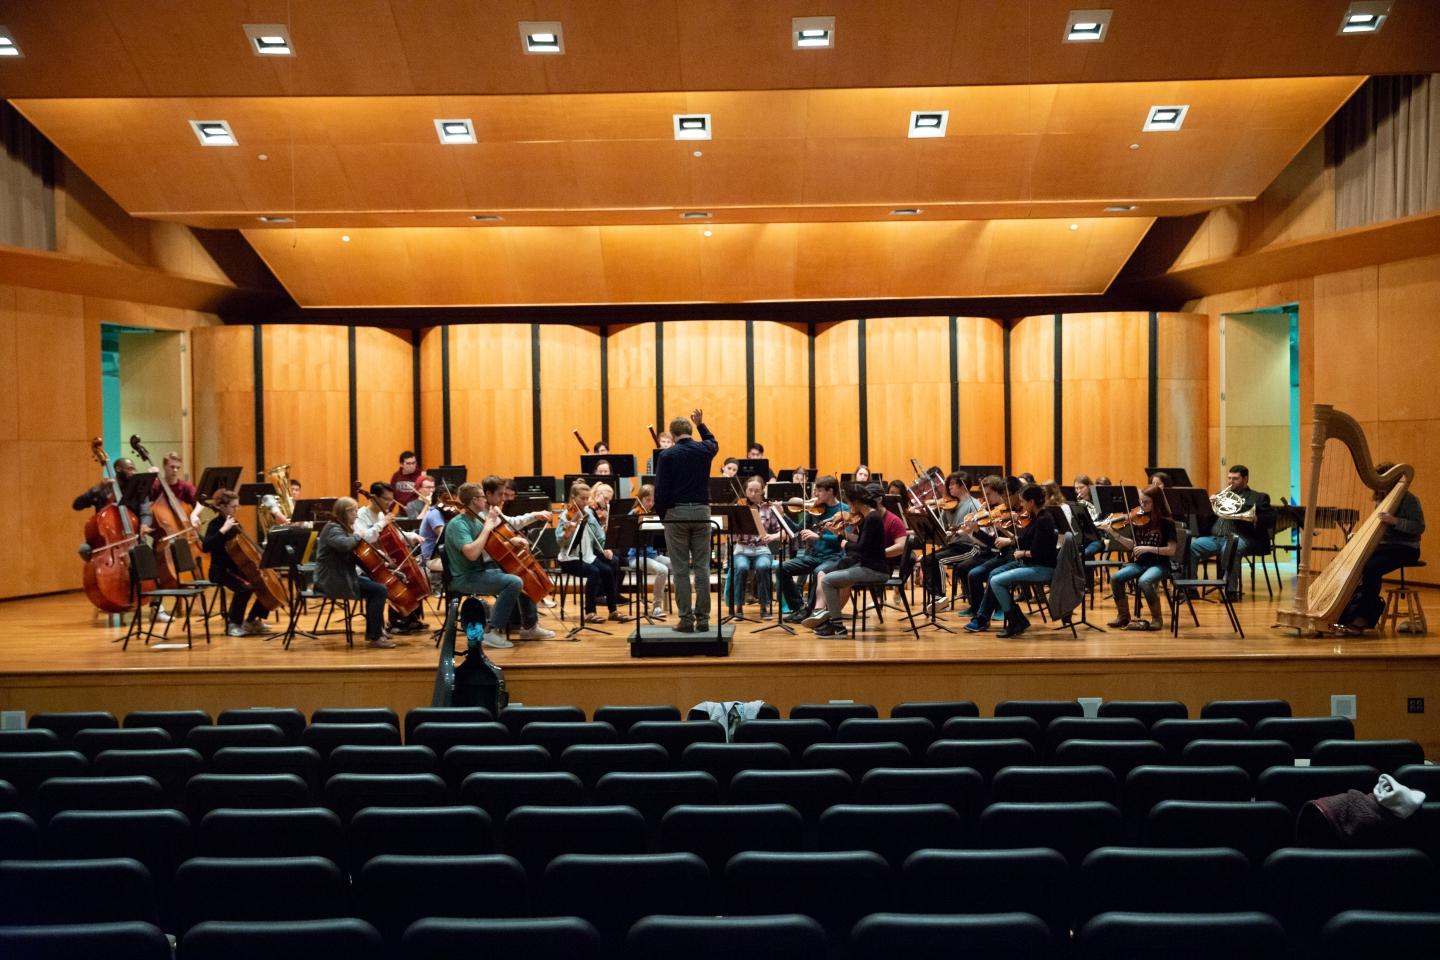 Orchestra practicing on stage in Ruth Taylor recital hall